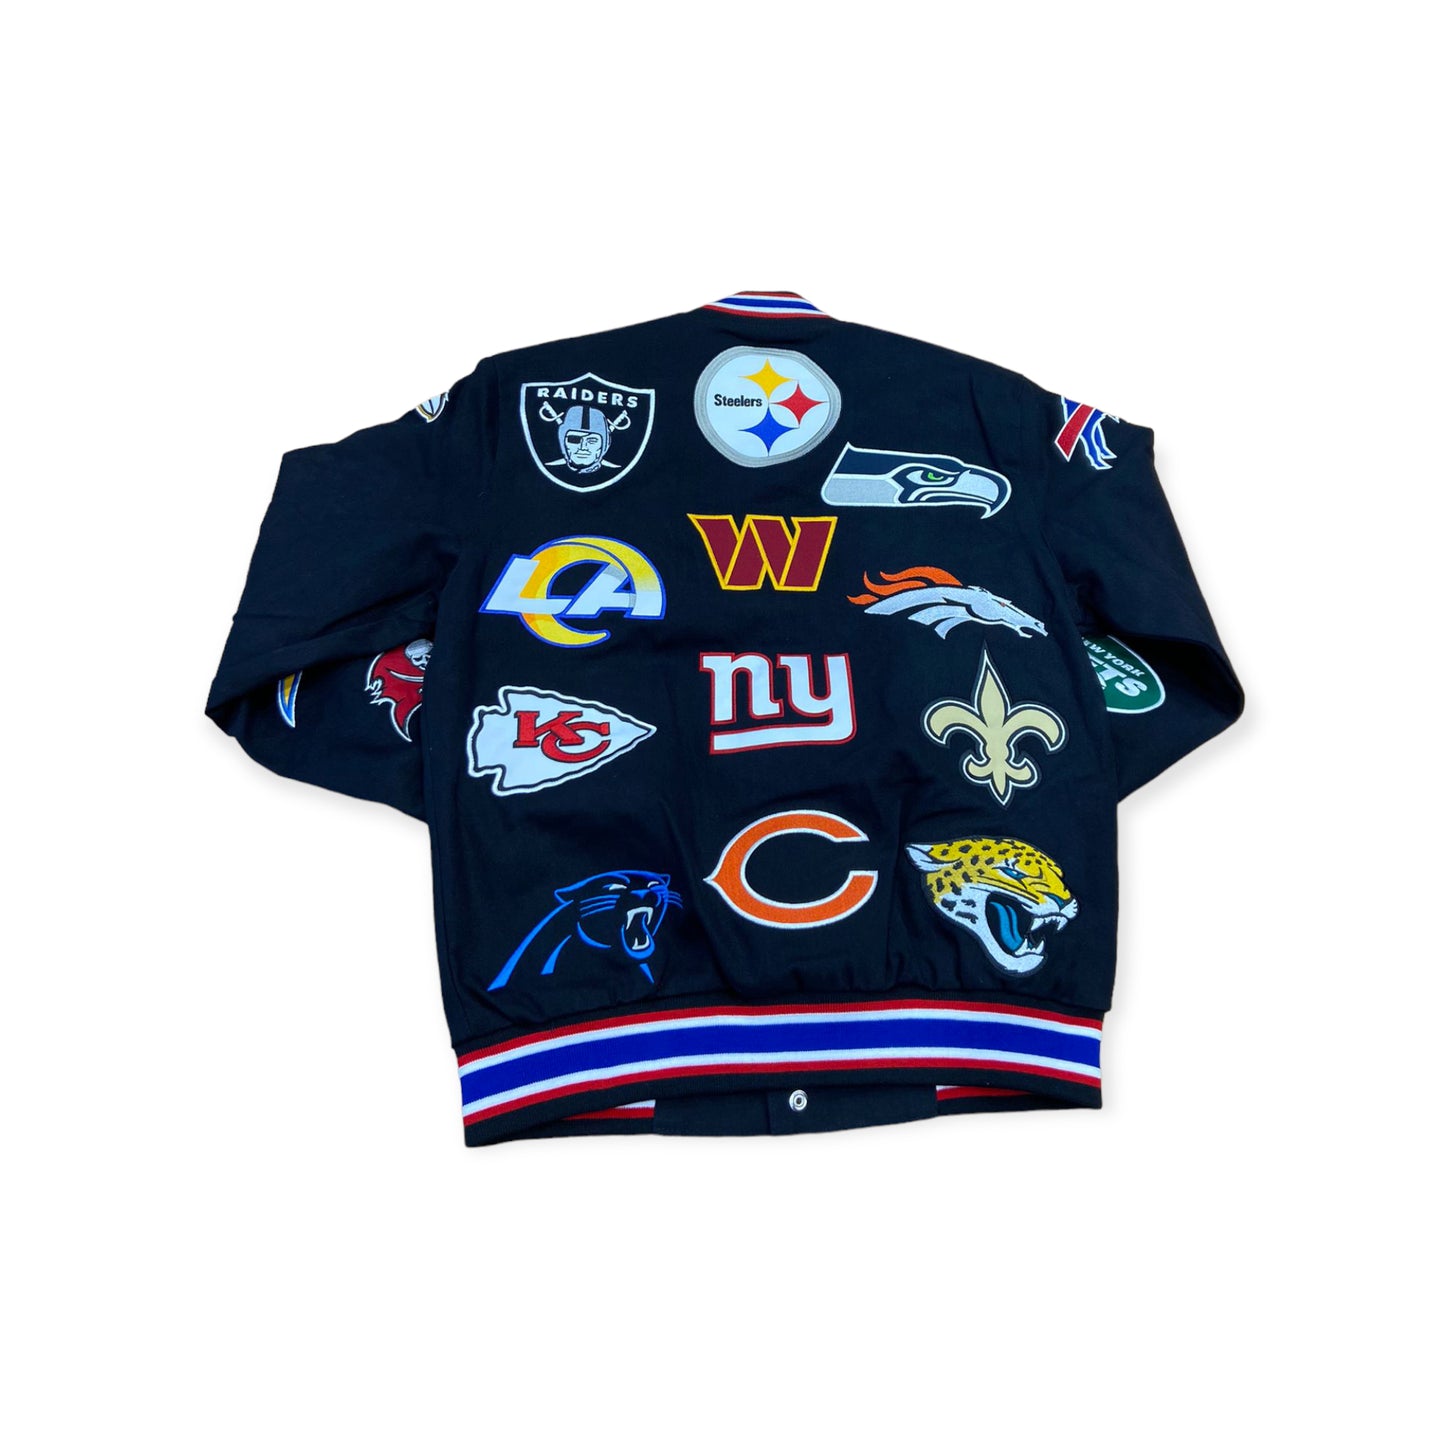 nfl jacket with all the teams on it